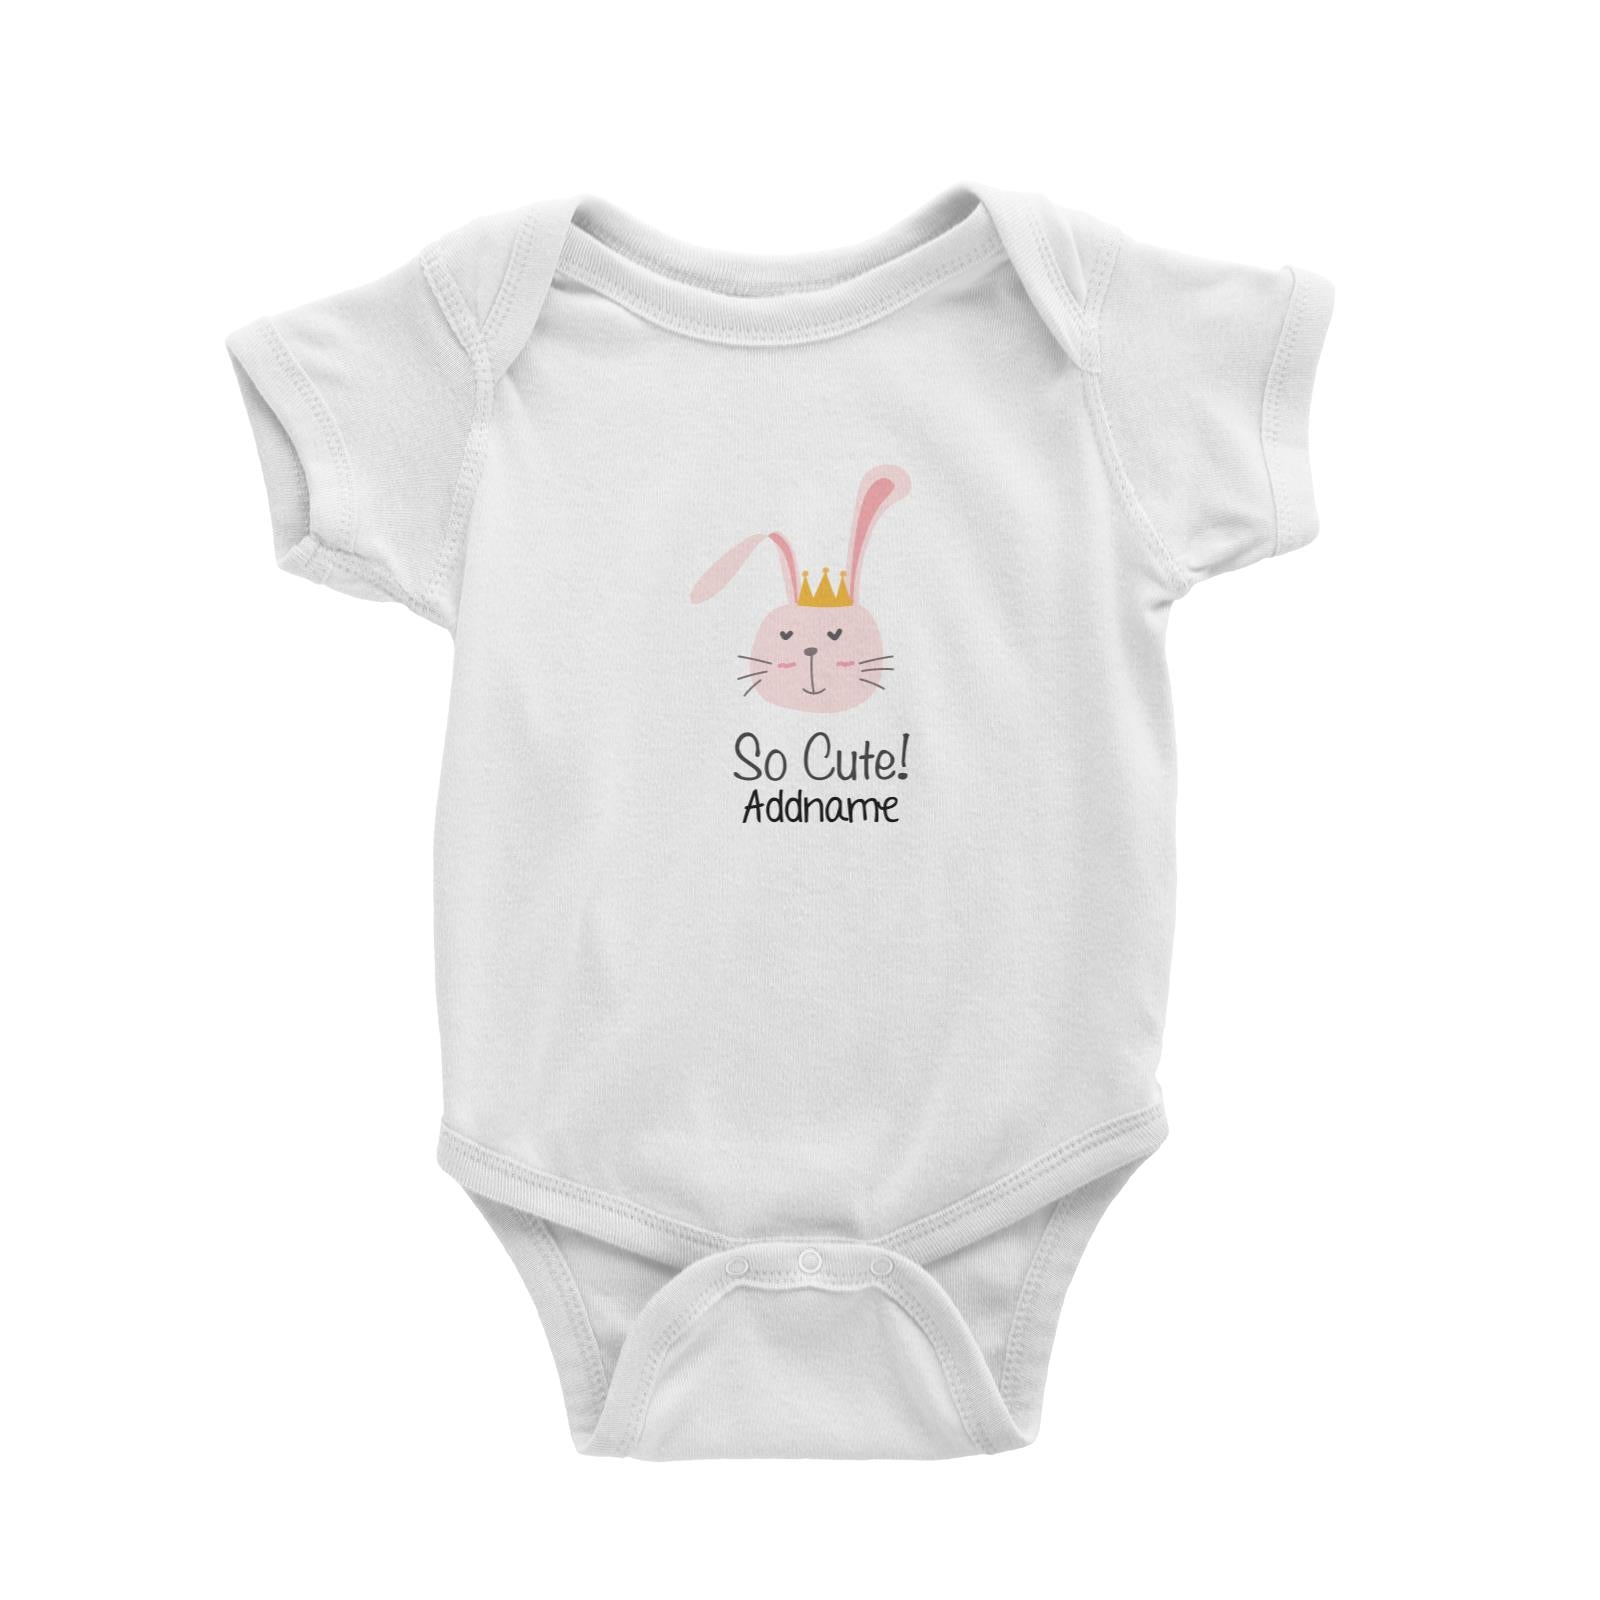 Cute Animals And Friends Series Cute Love Bunny With Crown Addname Baby Romper